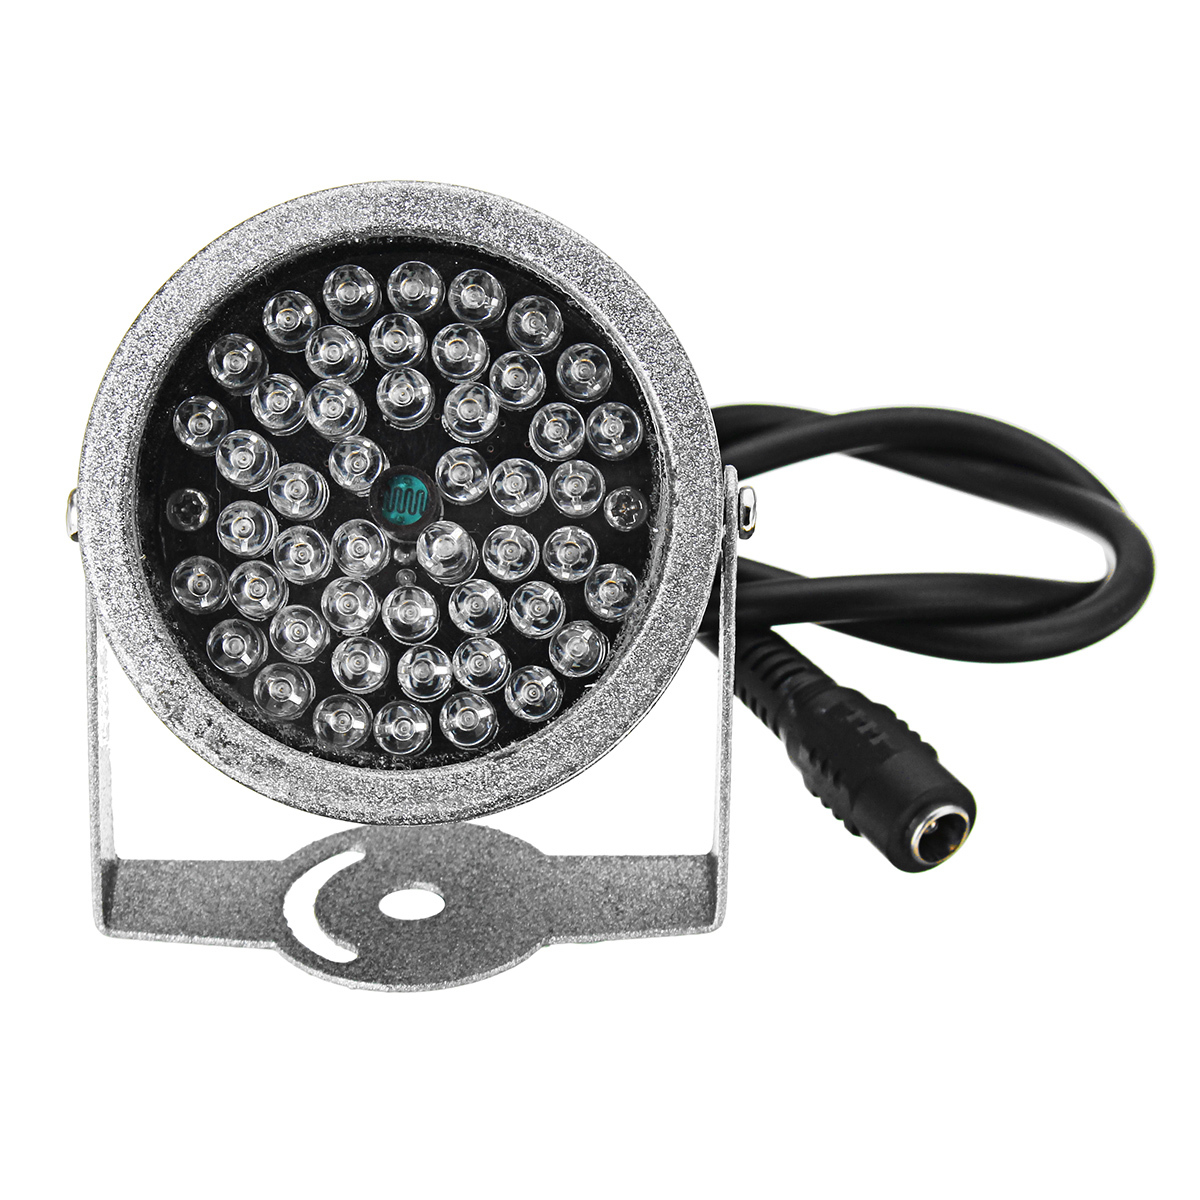 Invisible Infrared Illuminator 940nm 48 LED IR Lights Lamp for CCTV Security Camera 2